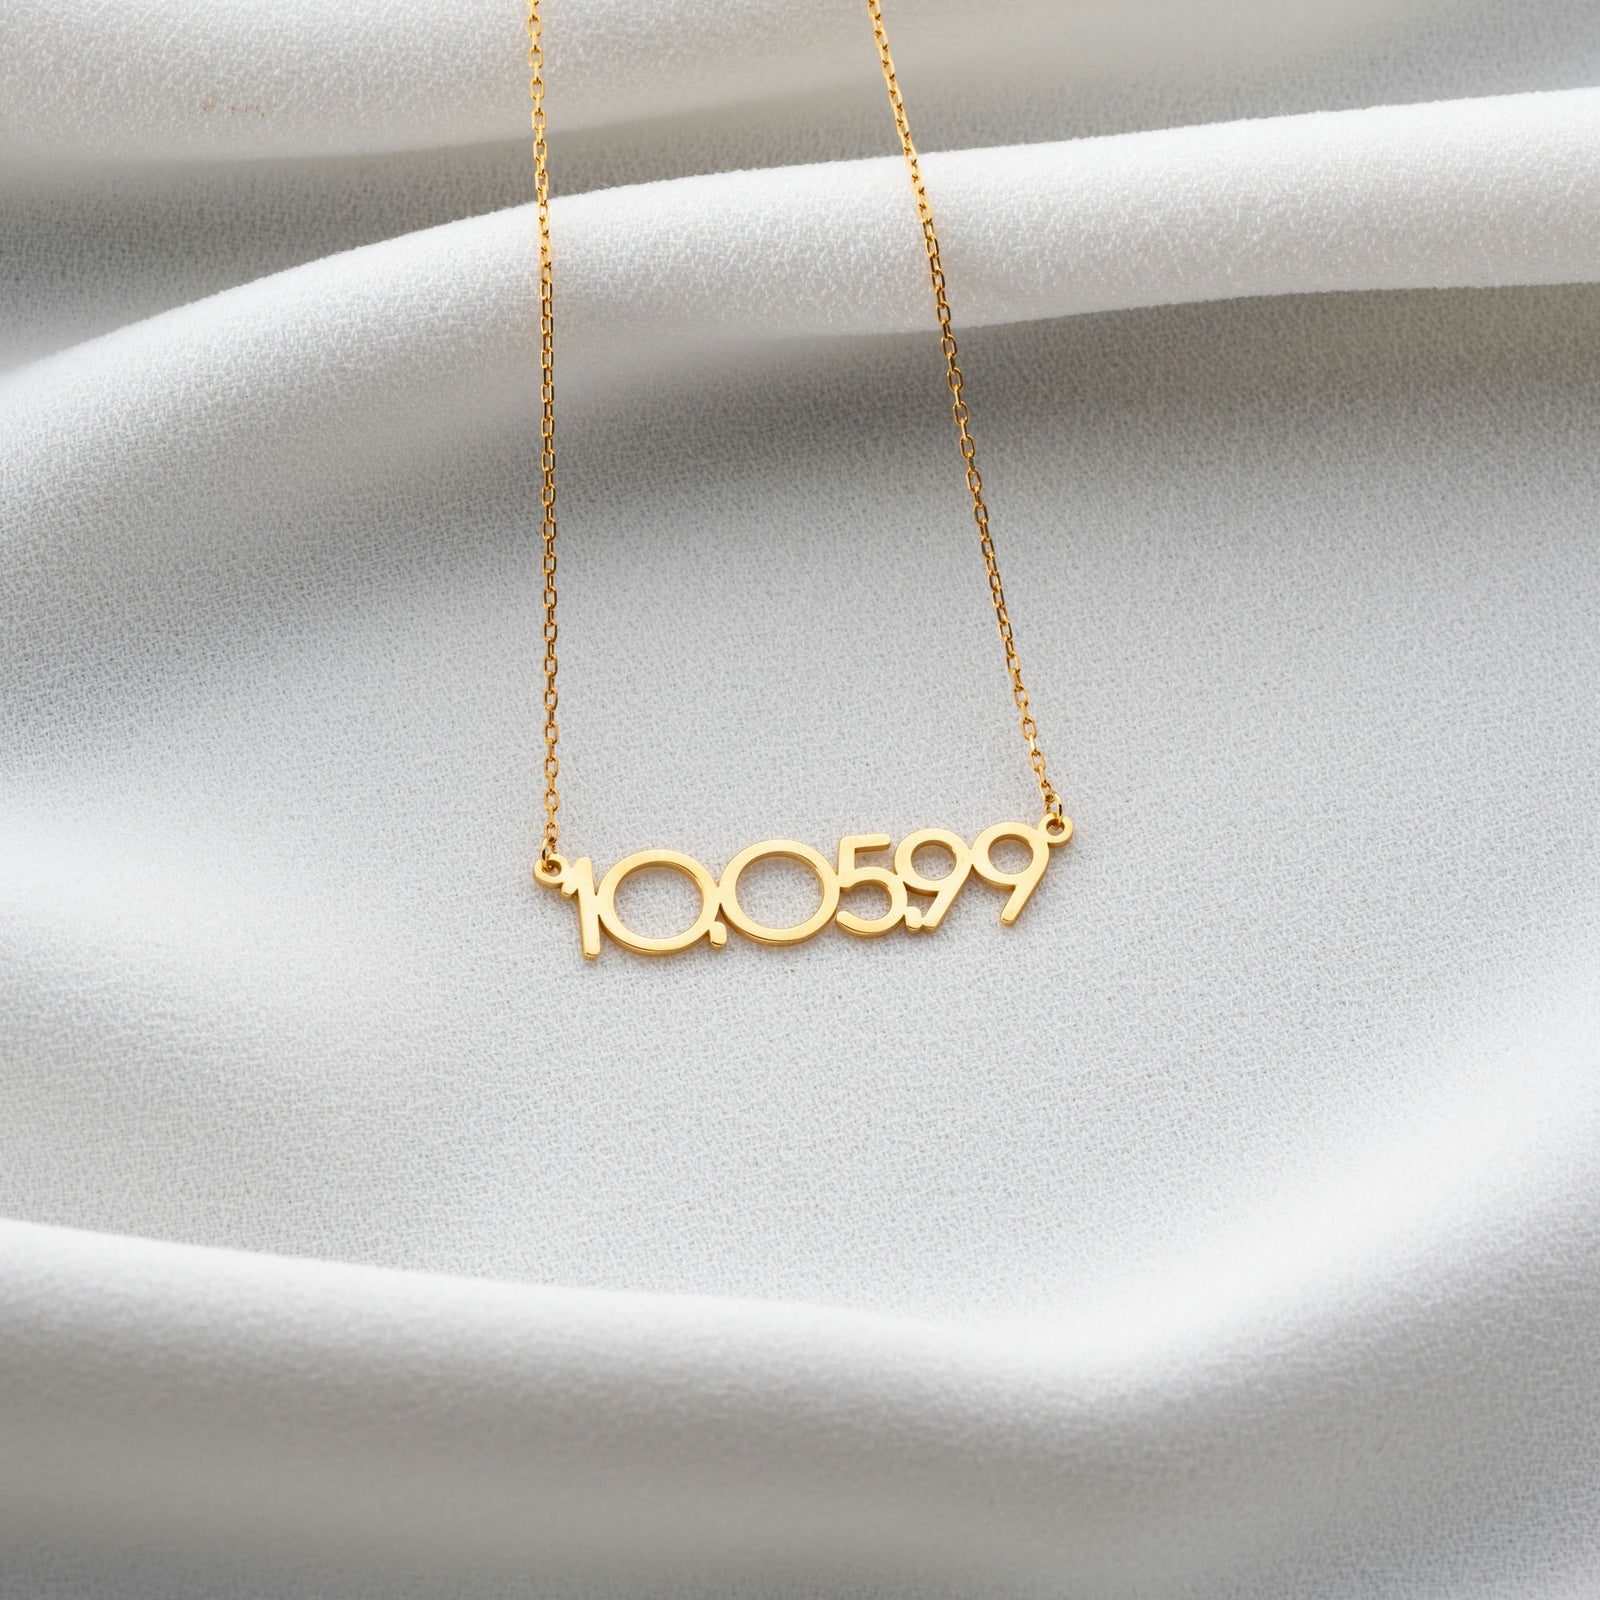 Necklace With Date In Sterling Silver